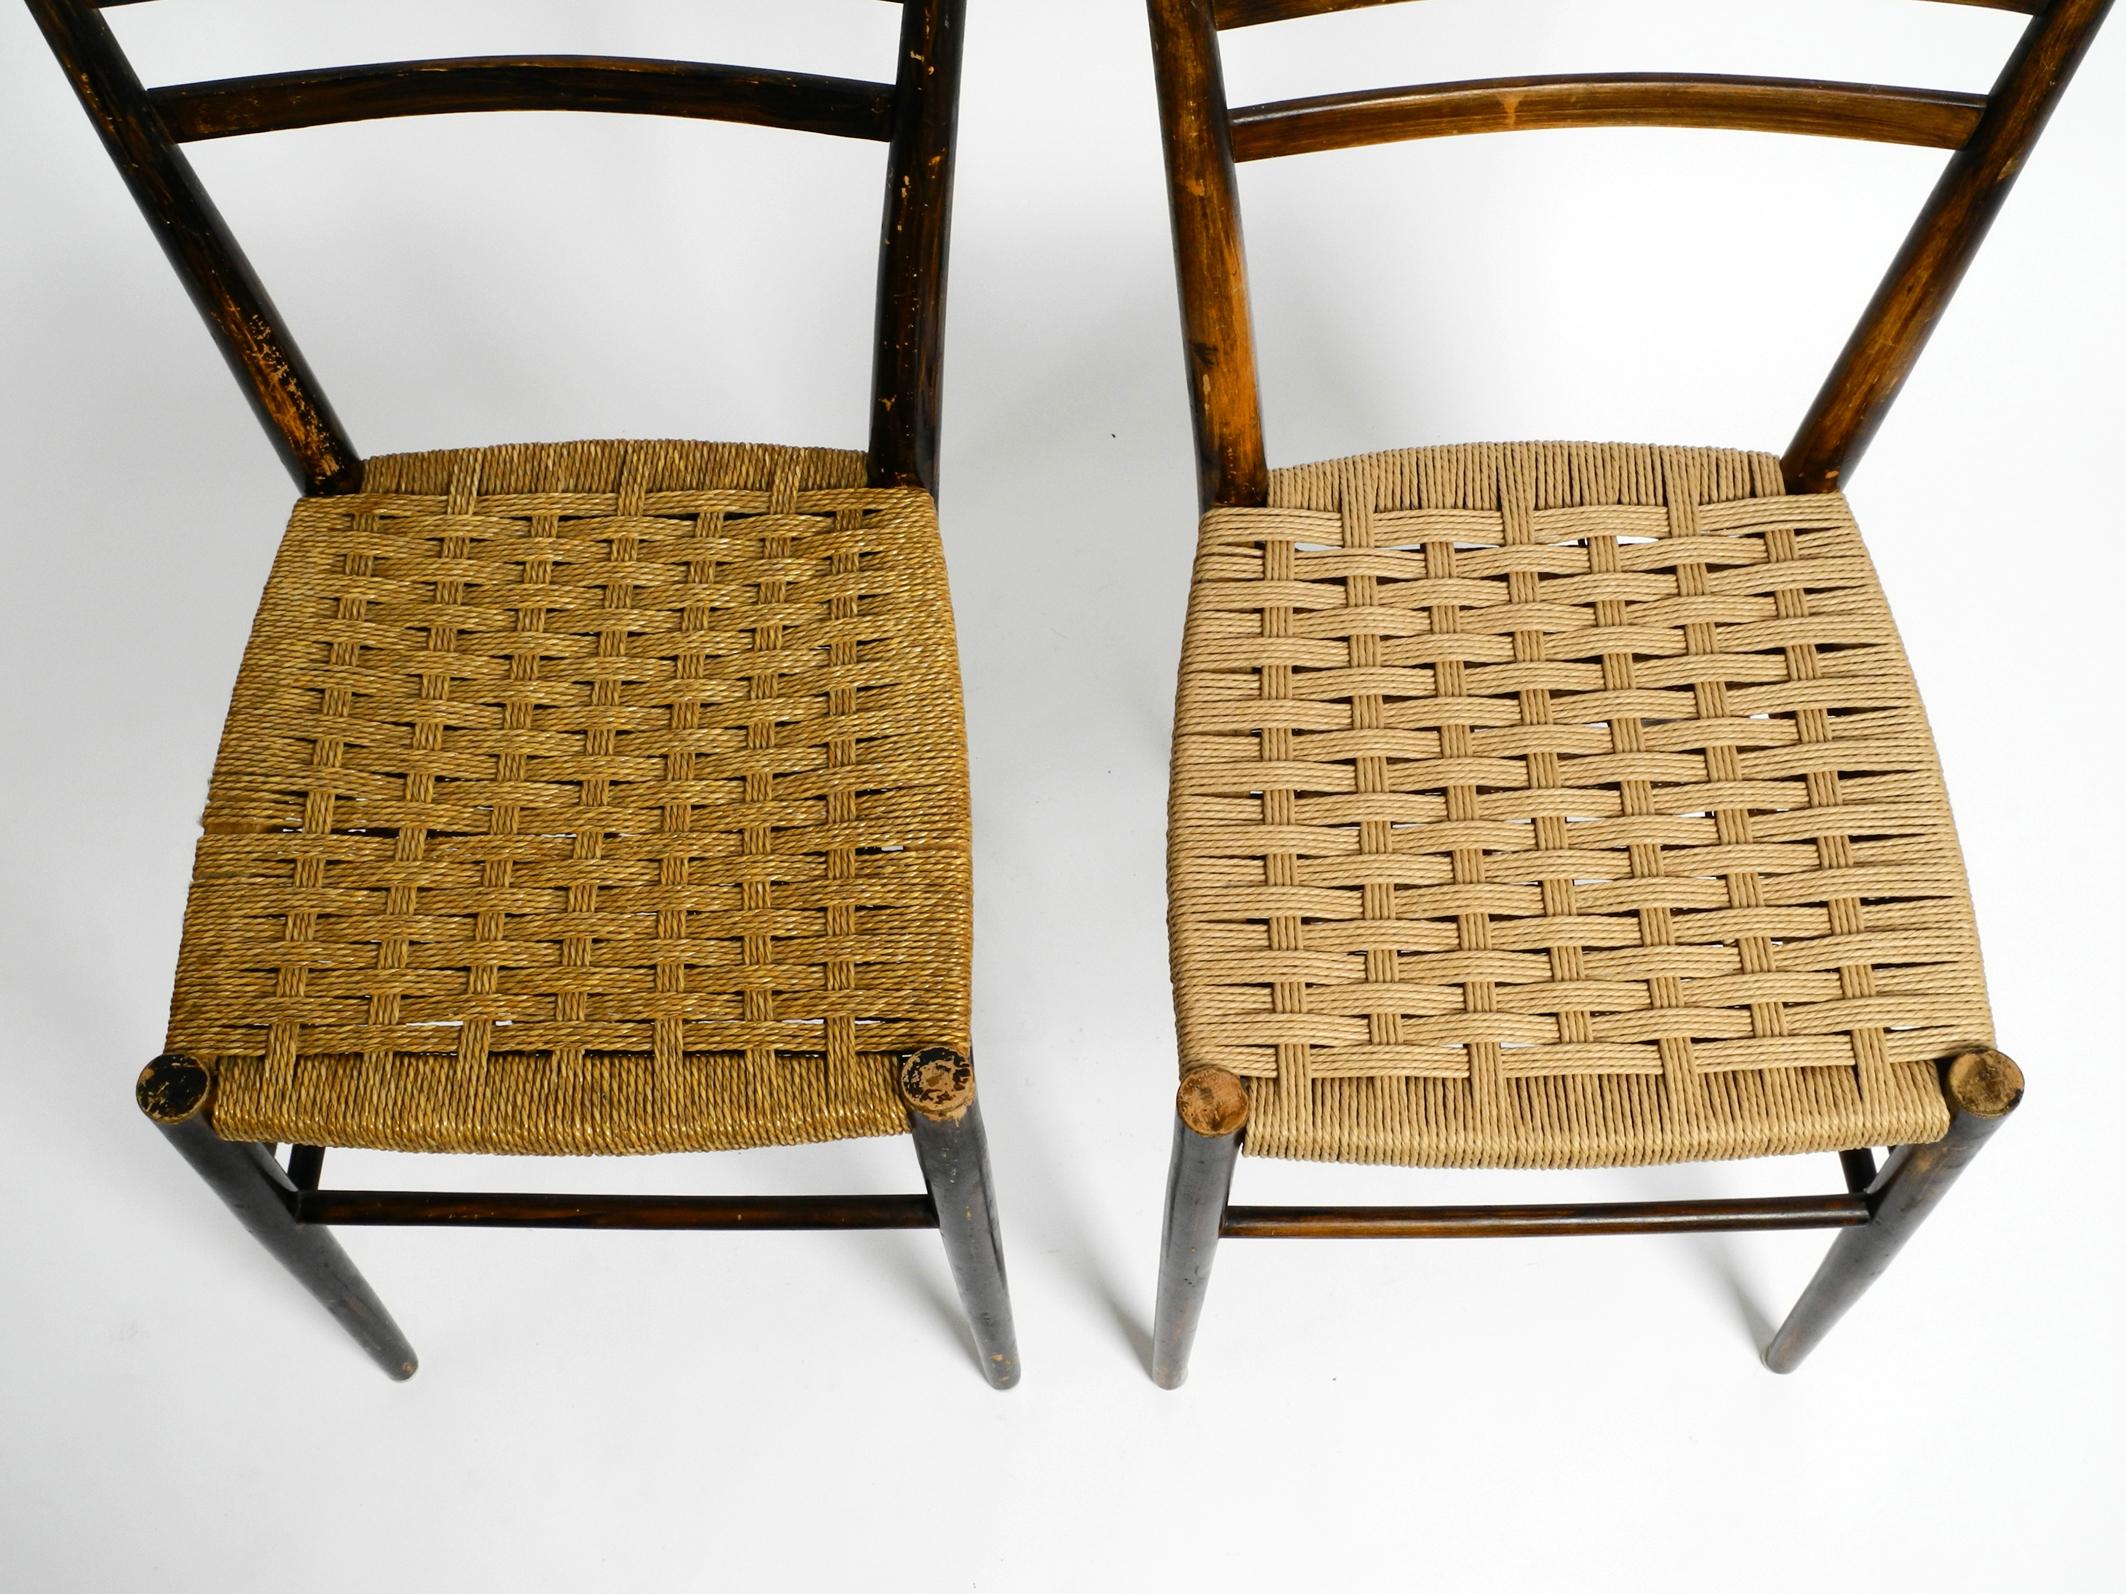 Pair of Mid-Century Italian Wooden Dining Chairs with Wicker Cord Seats For Sale 1